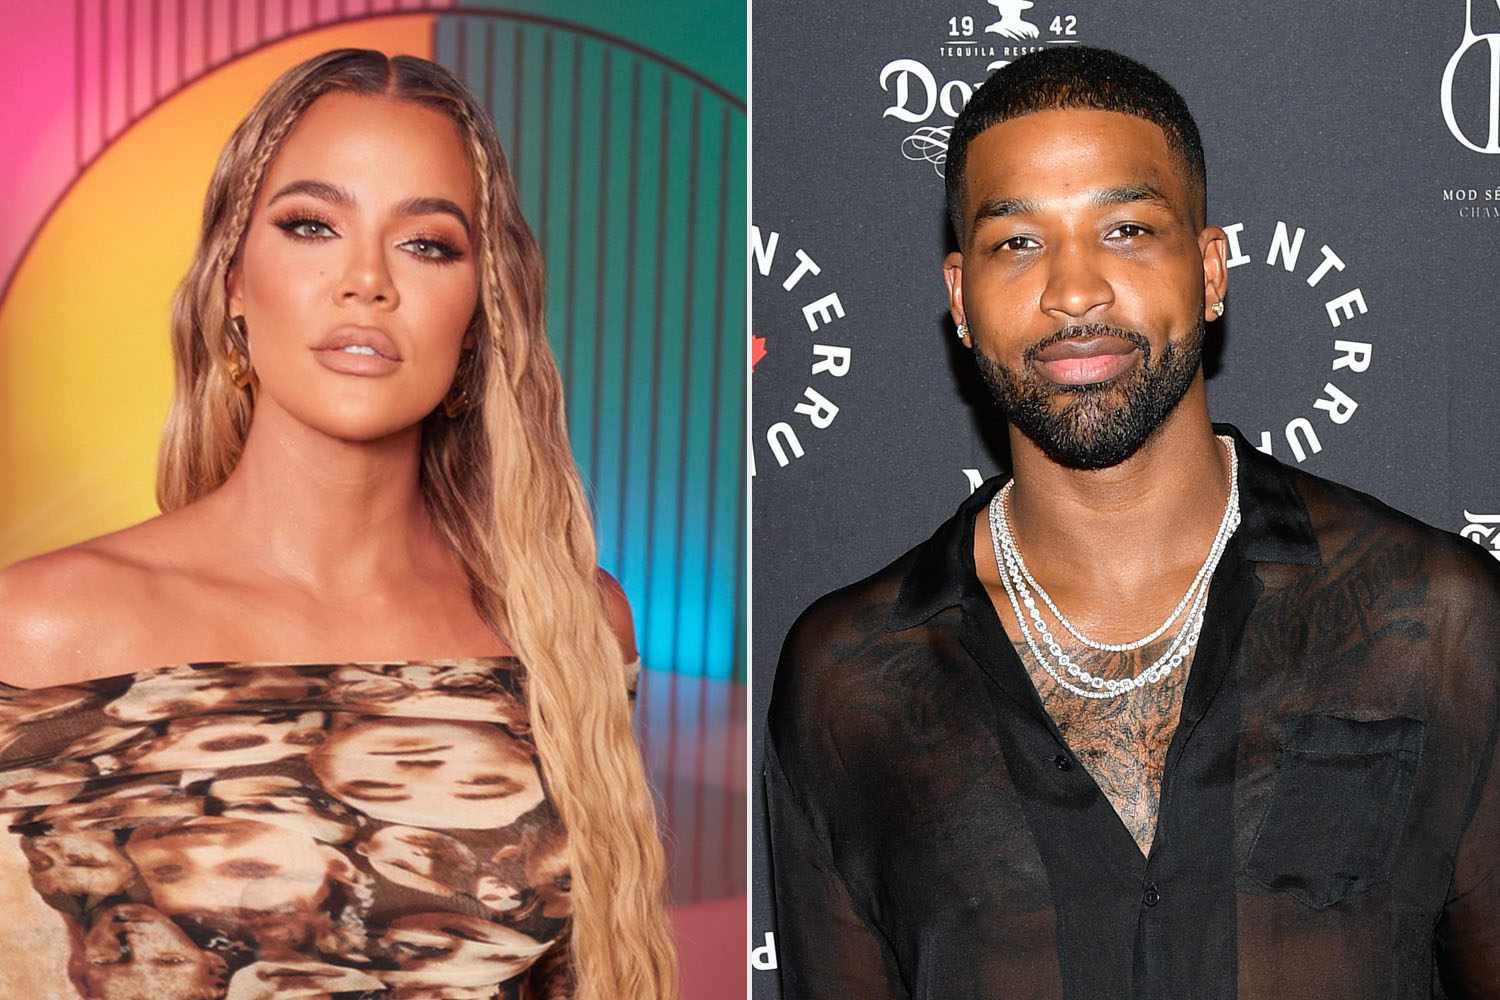 Khloé Kardashian Felt 'Relief' When Tristan Thompson Moved to Cleveland After Always Being 'on Guard' with Giving False Hope